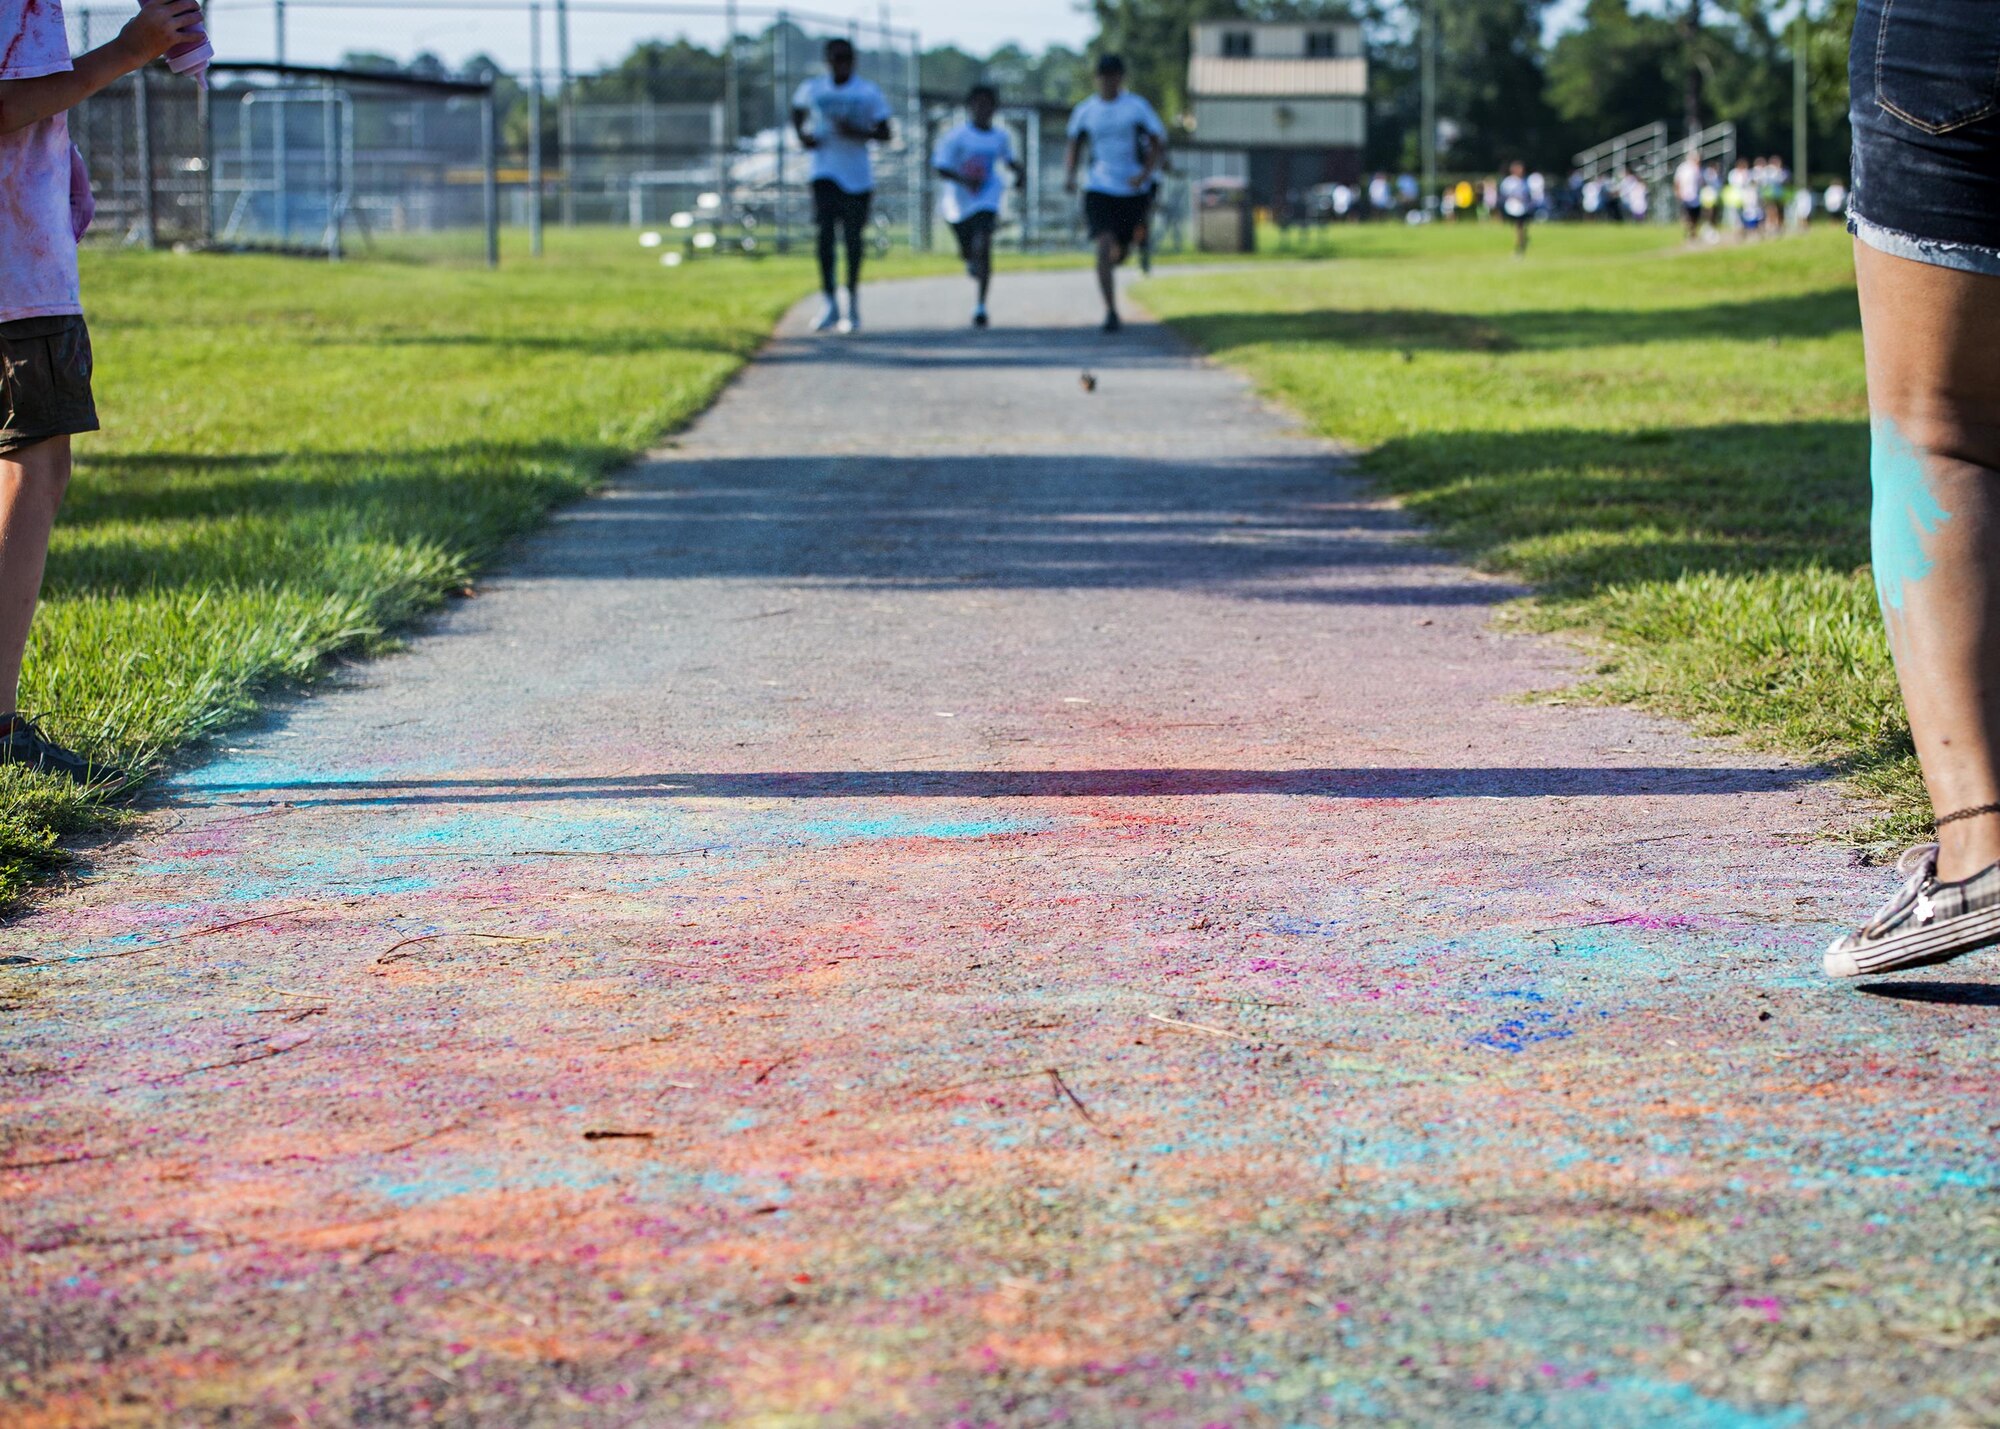 The last wave of runners race towards a ‘splash zone’ during a Kid’s Color Run, Sept. 10, 2016, at Moody Air Force Base, Ga. The event was free and each participant was given a white t-shirt with hopes that it would be colored with chalk by the end of their run. (U.S. Air Force photo by Airman 1st Class Janiqua P. Robinson)